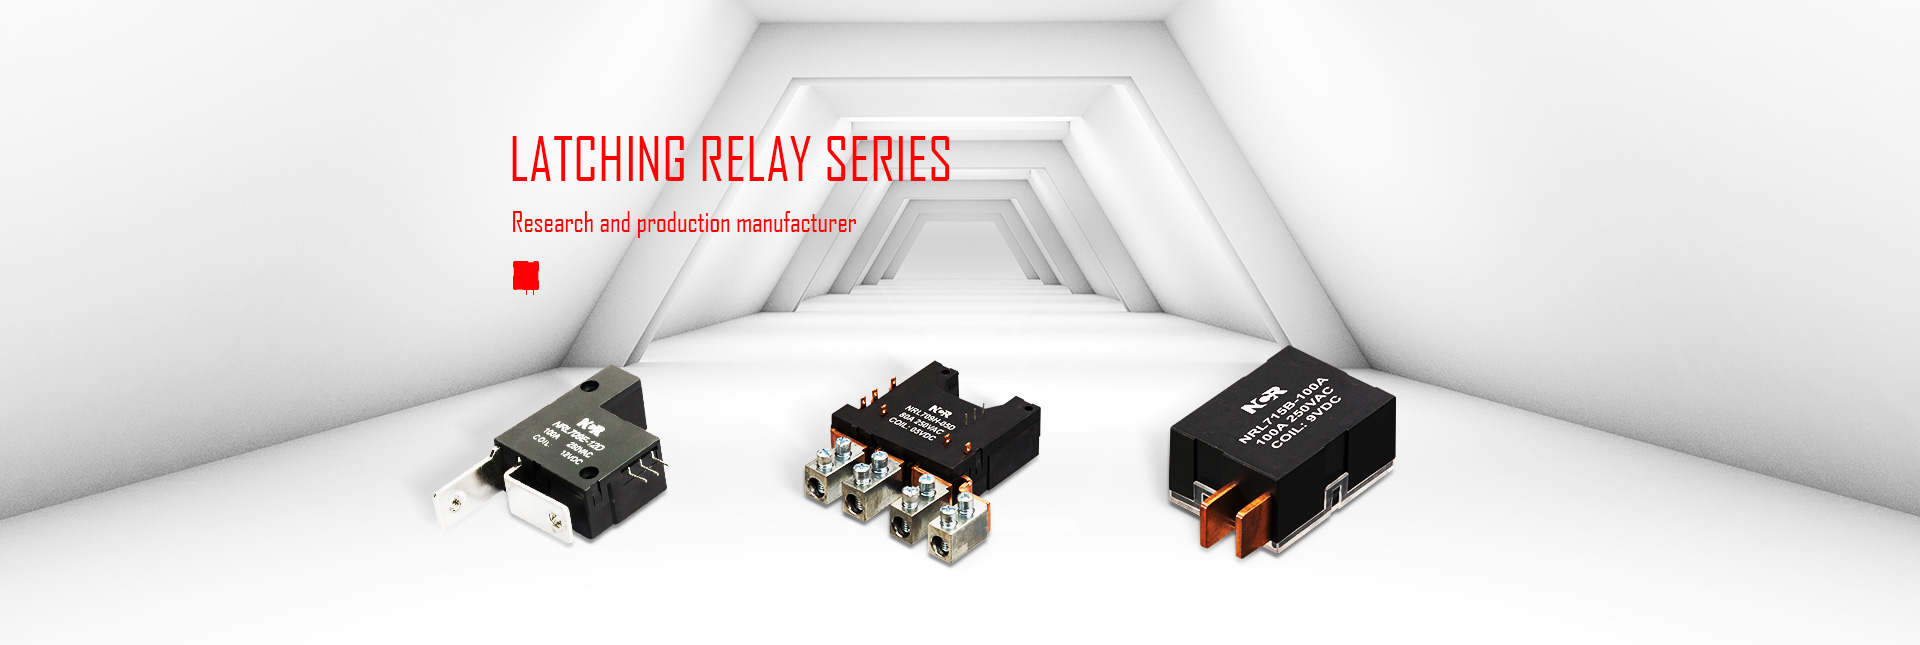 dc latching relay